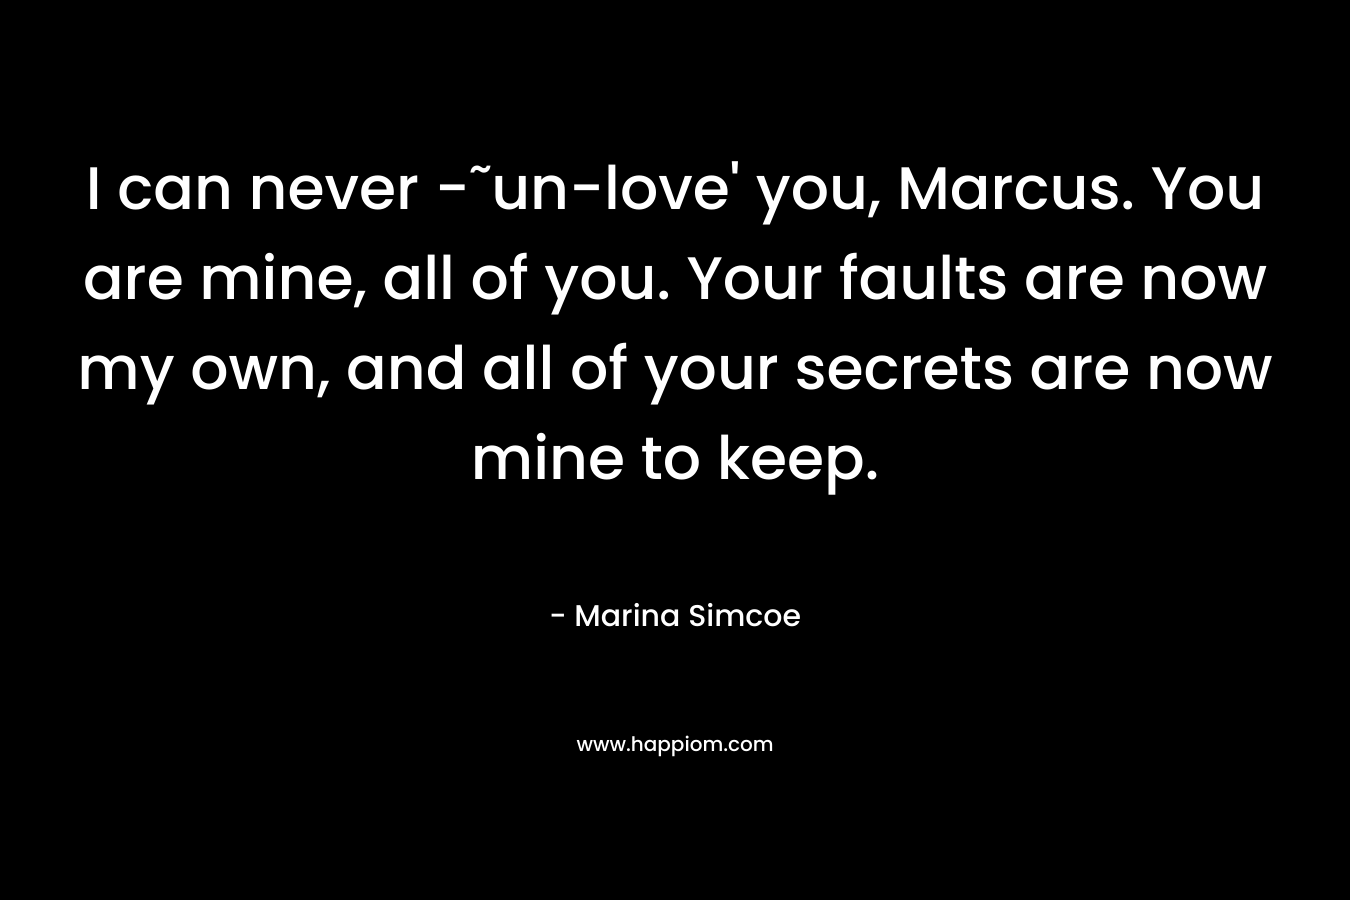 I can never -˜un-love' you, Marcus. You are mine, all of you. Your faults are now my own, and all of your secrets are now mine to keep.